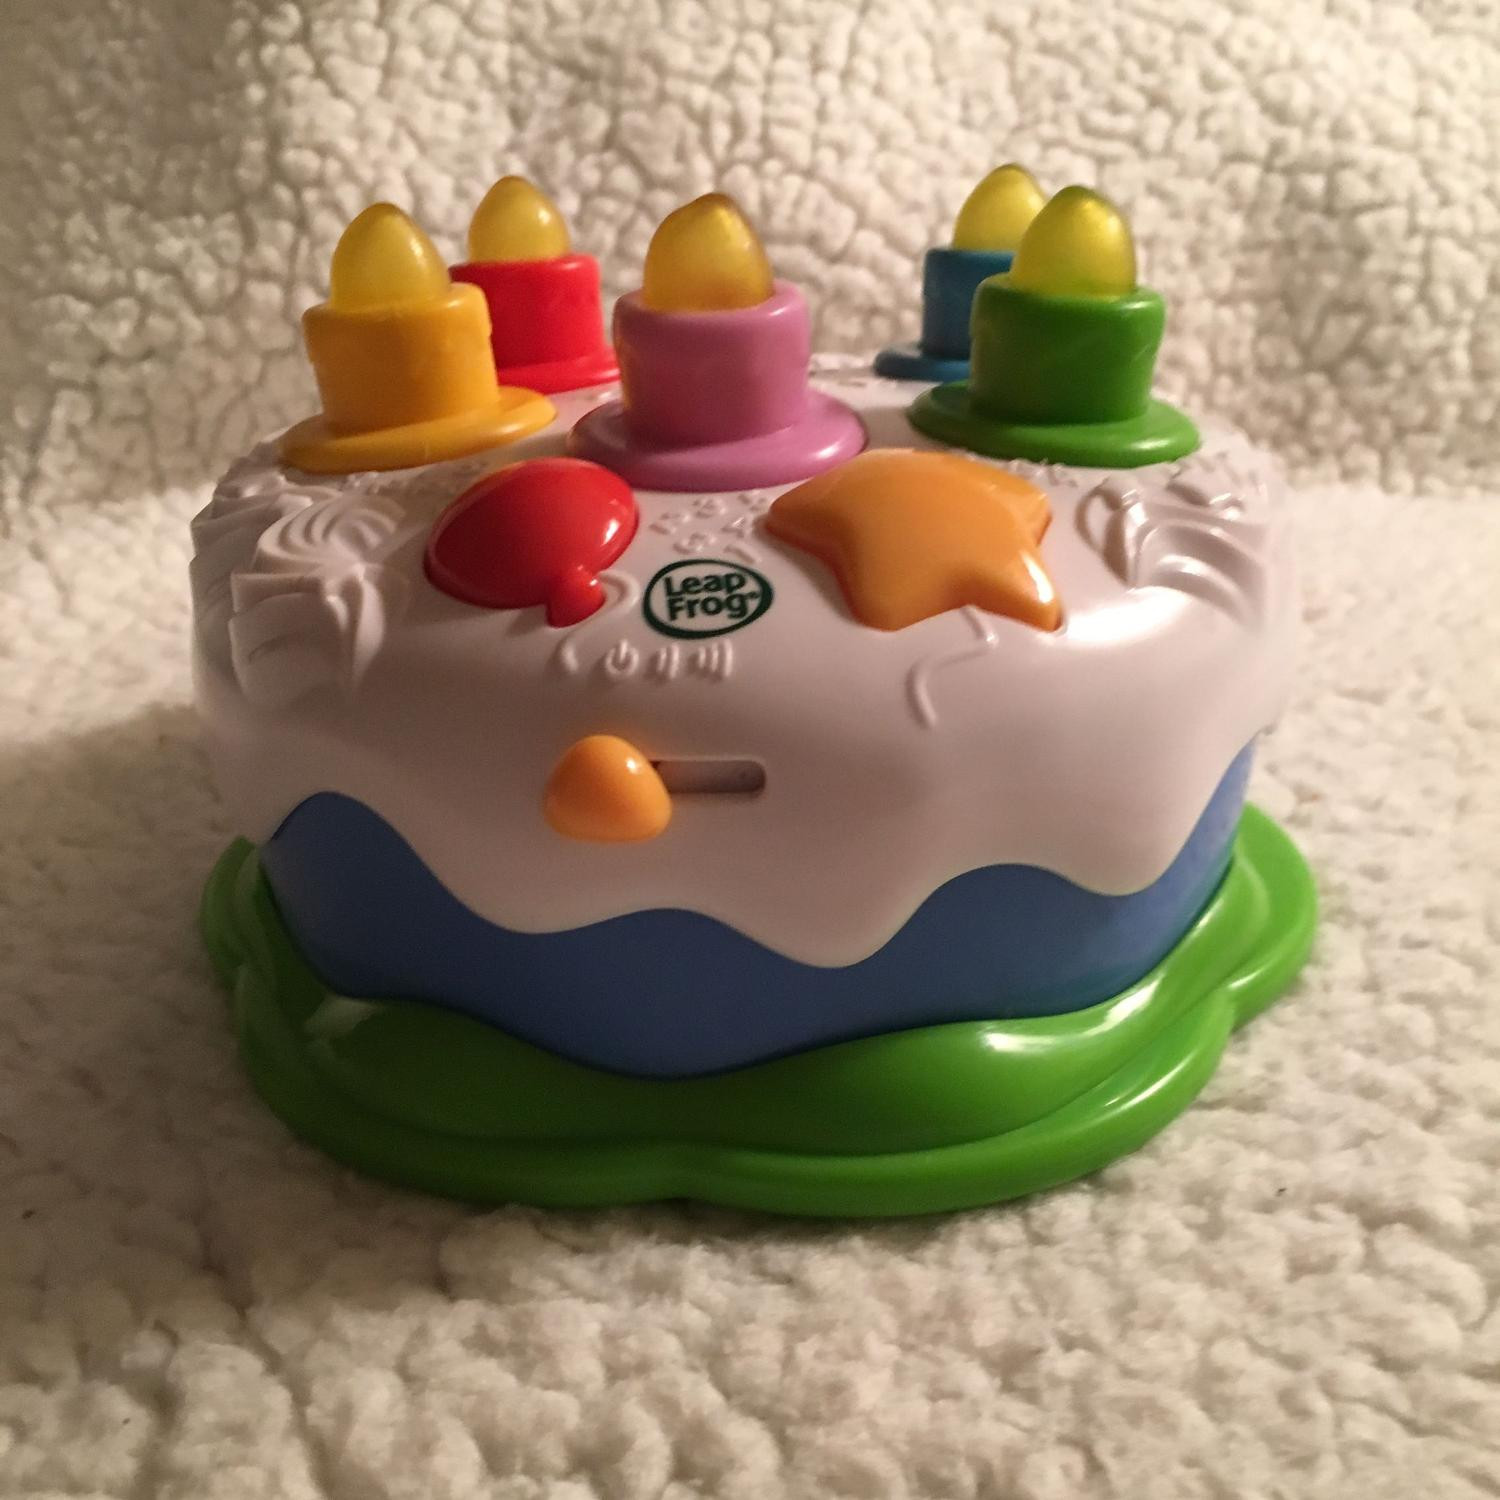 Leapfrog Birthday Cake
 Find more Leap Frog Birthday Cake Counting Candles for